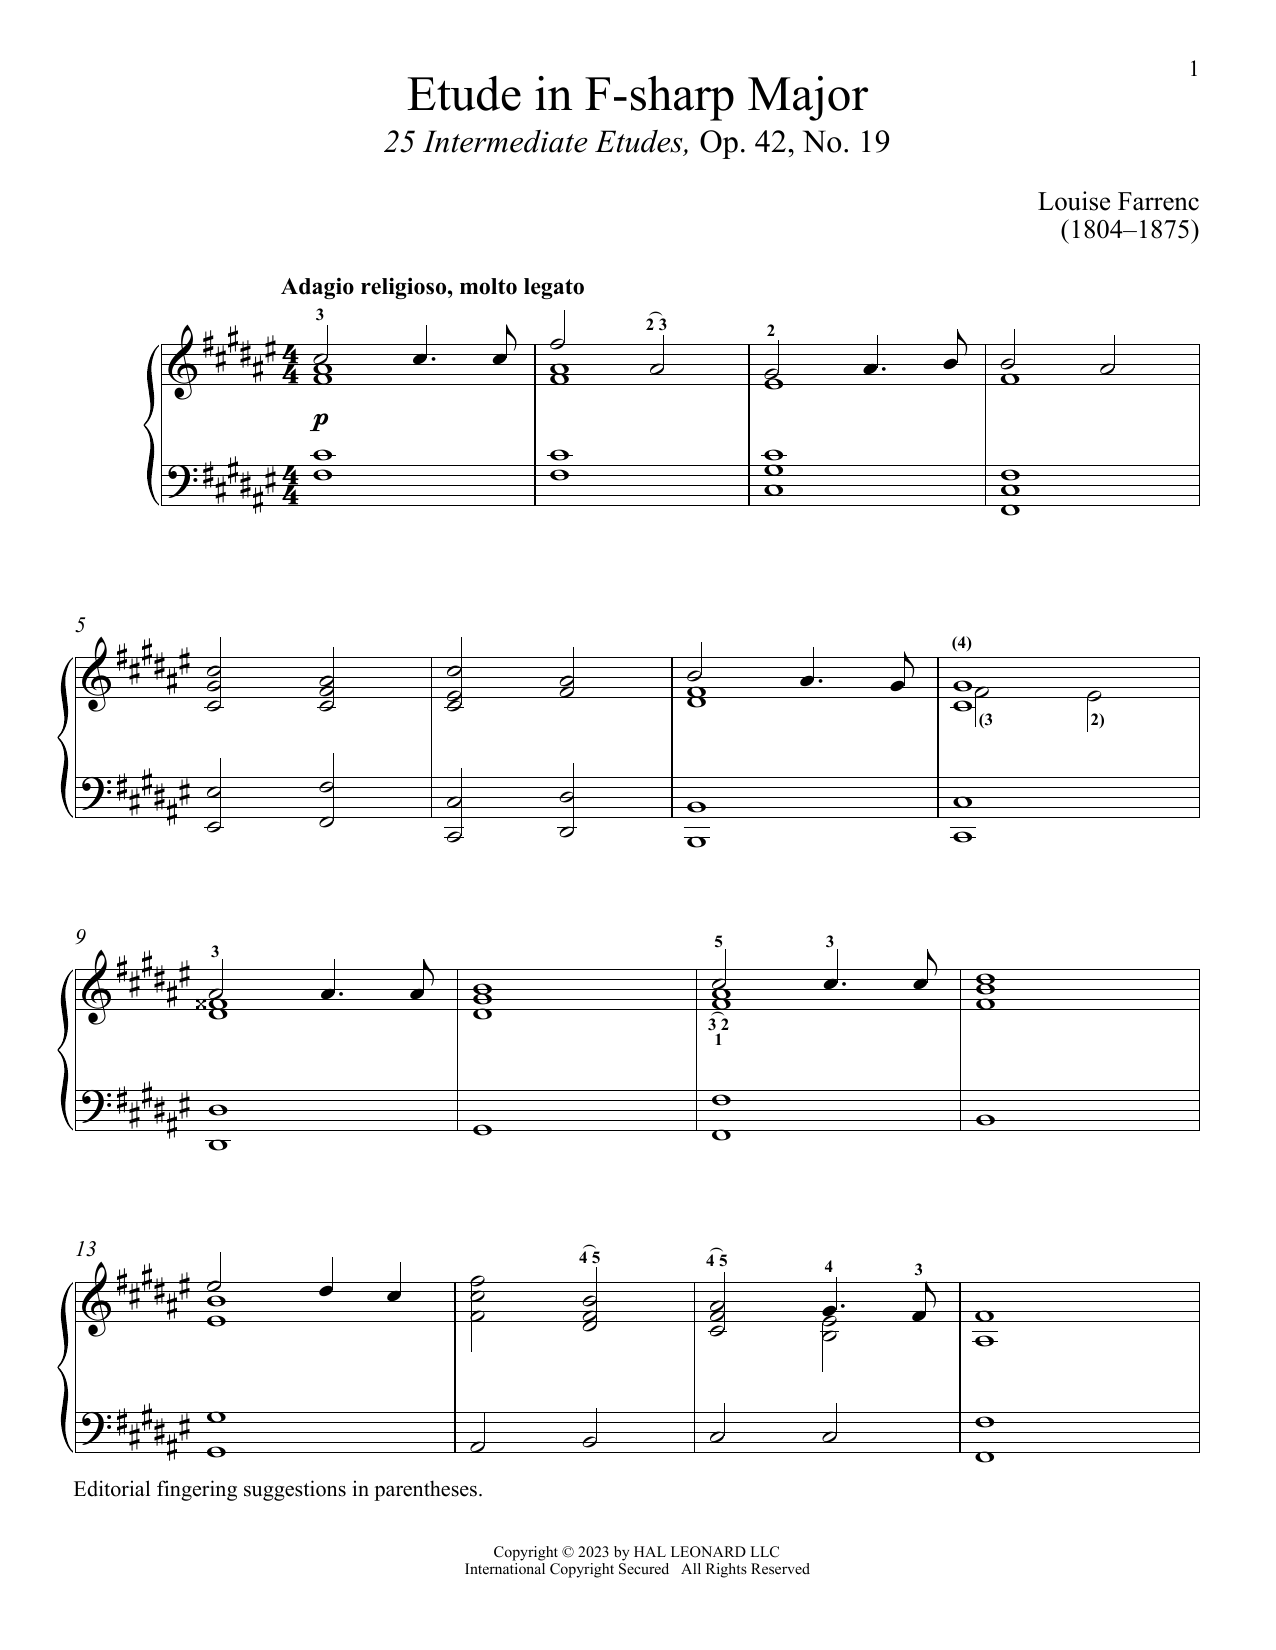 Download Louise Dumont Farrenc Etude in F-sharp Major Sheet Music